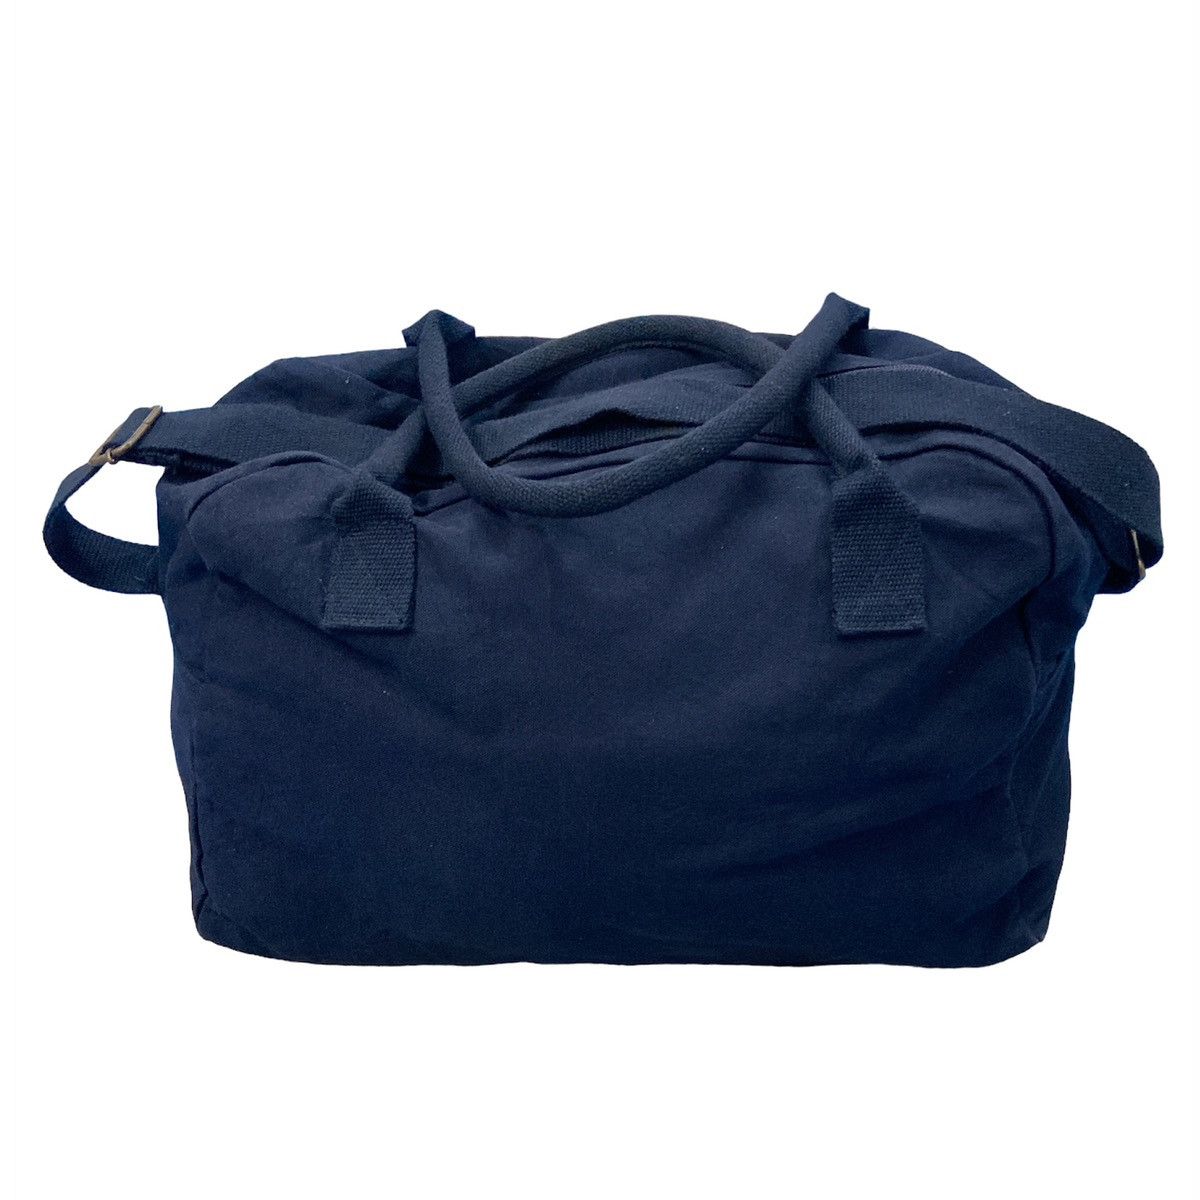 United Colors Of Benetton - United Colors of Bennetton Duffle Bag - 2